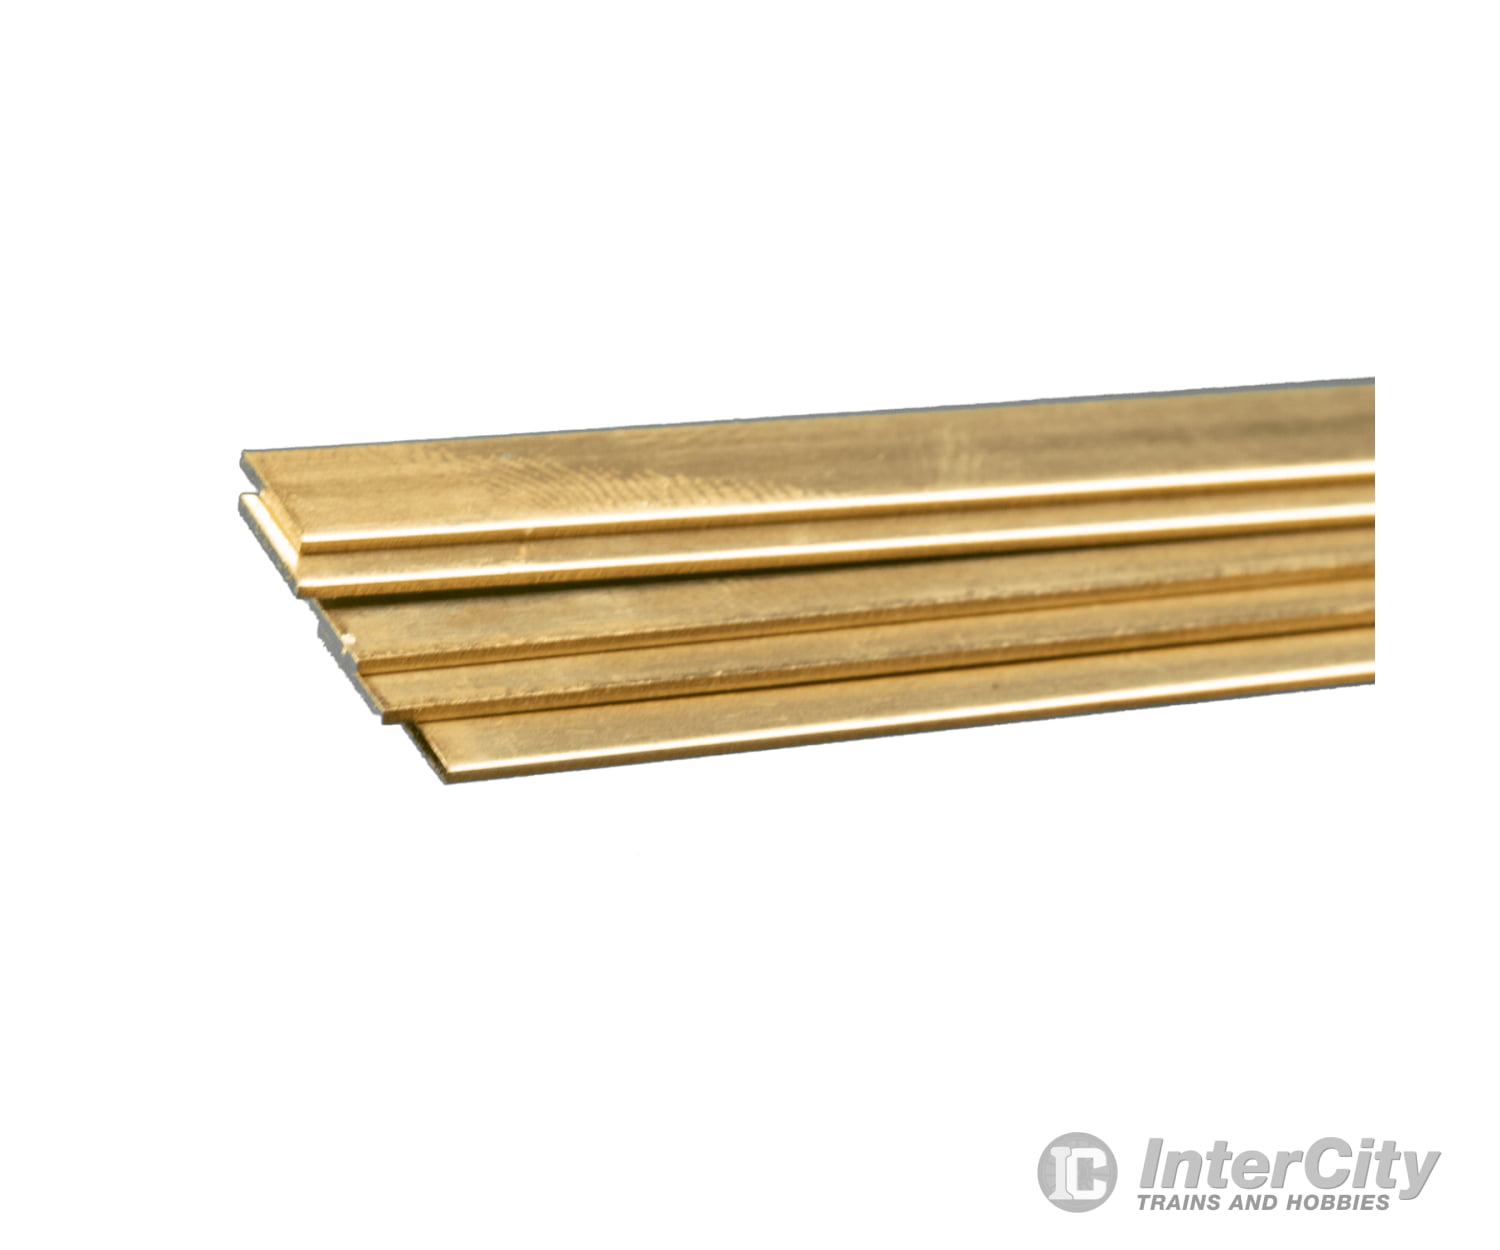 K&S Precision Metals 8226 Brass Strip: 0.094 Thick x 1/2 Wide x 12 Long,  1 Piece, Made in USA